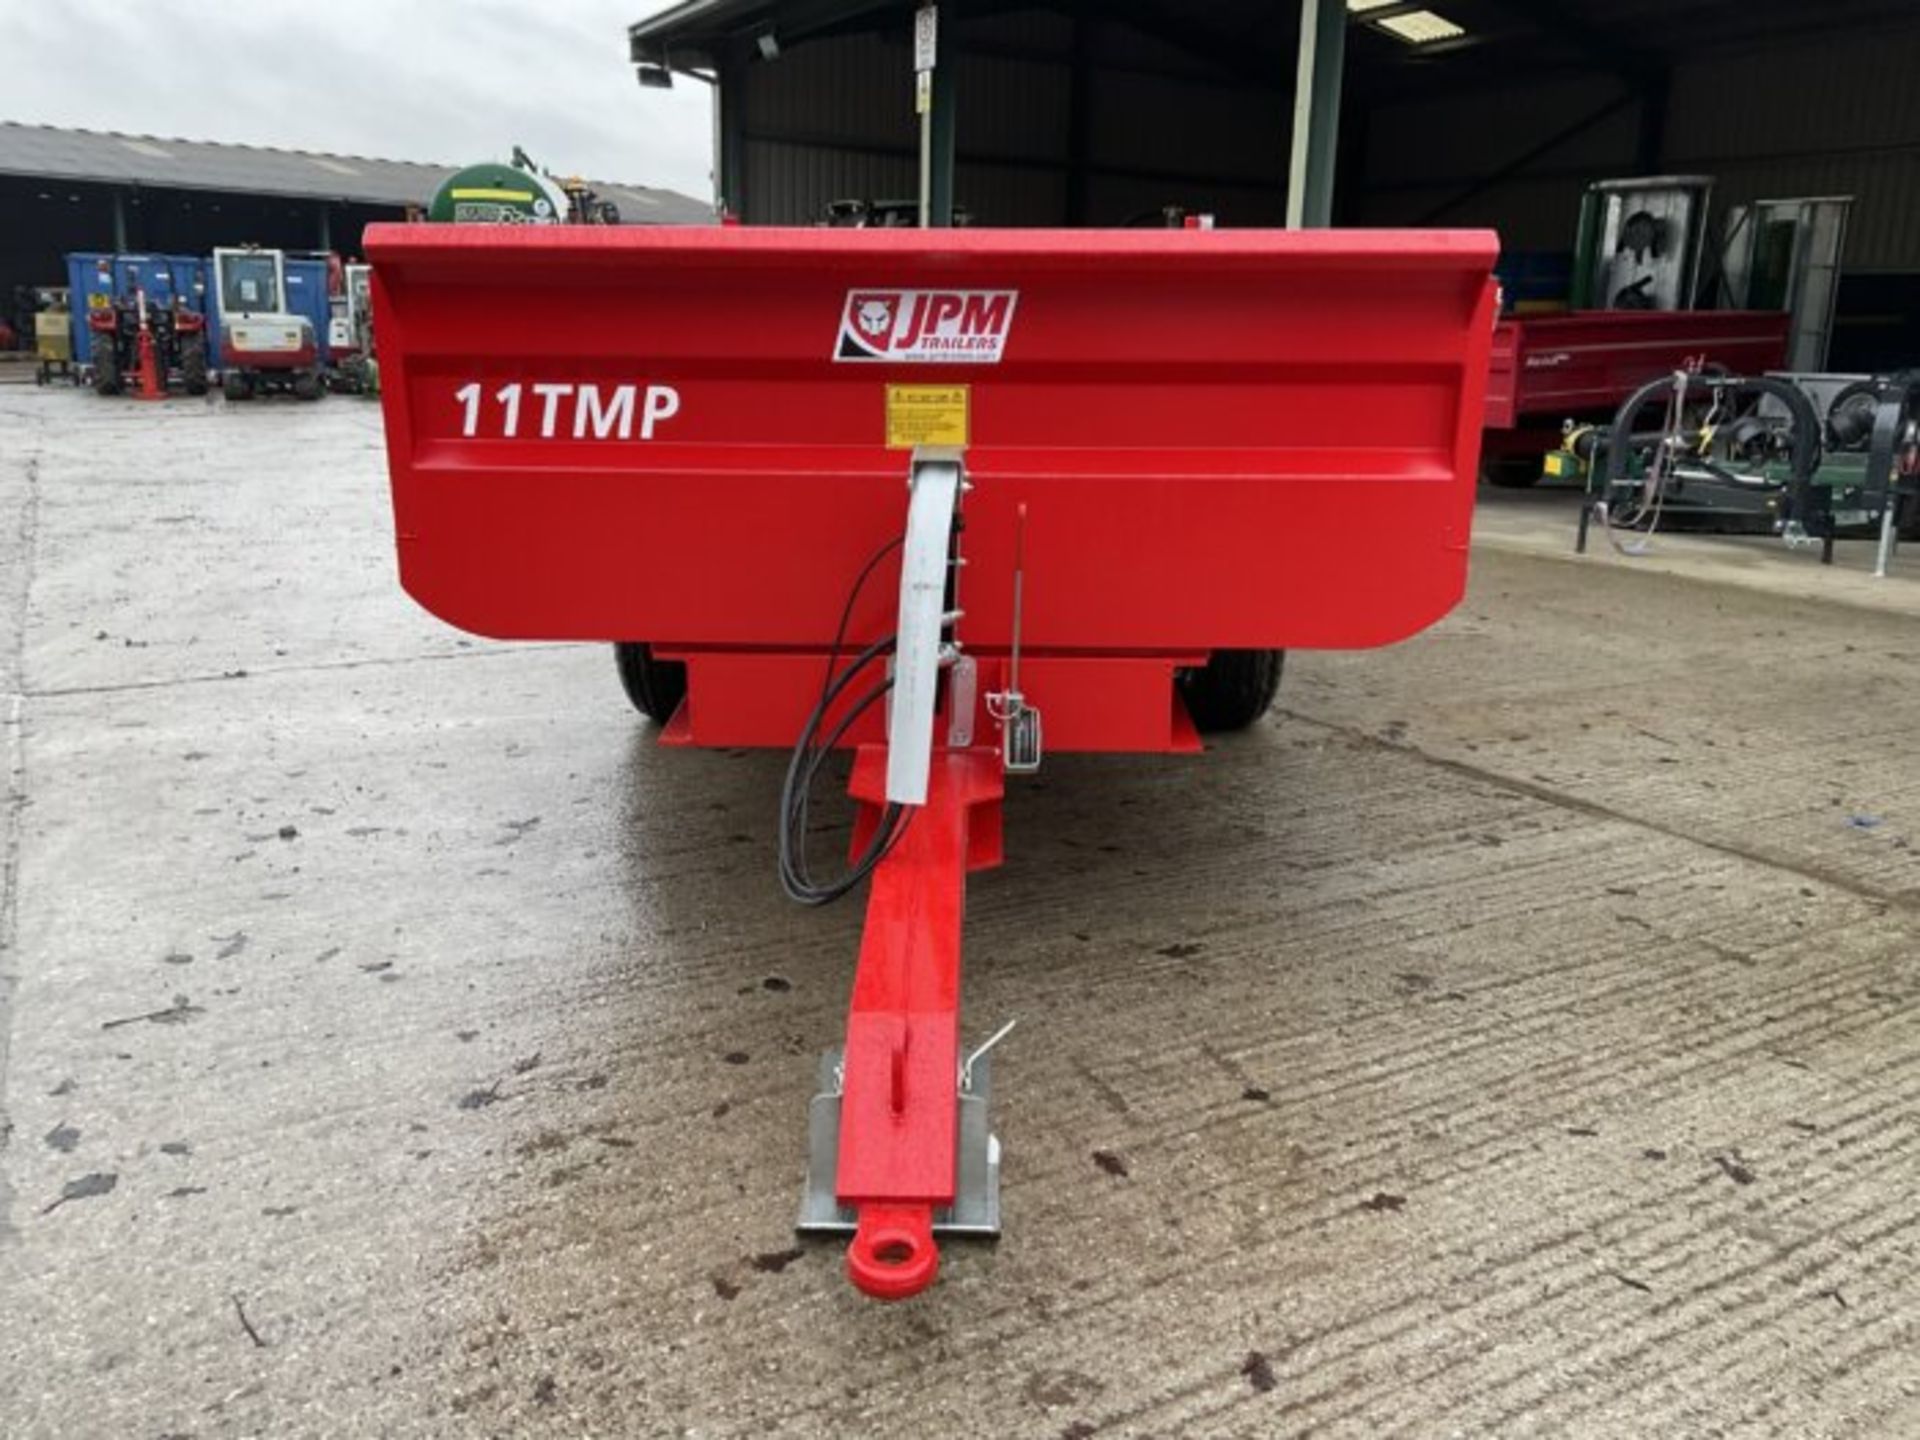 JPM 11 TMP. 11 TONNE MULTI PURPOSE TRAILER. DROP SIDE. WITH RAMPS. - Image 3 of 8